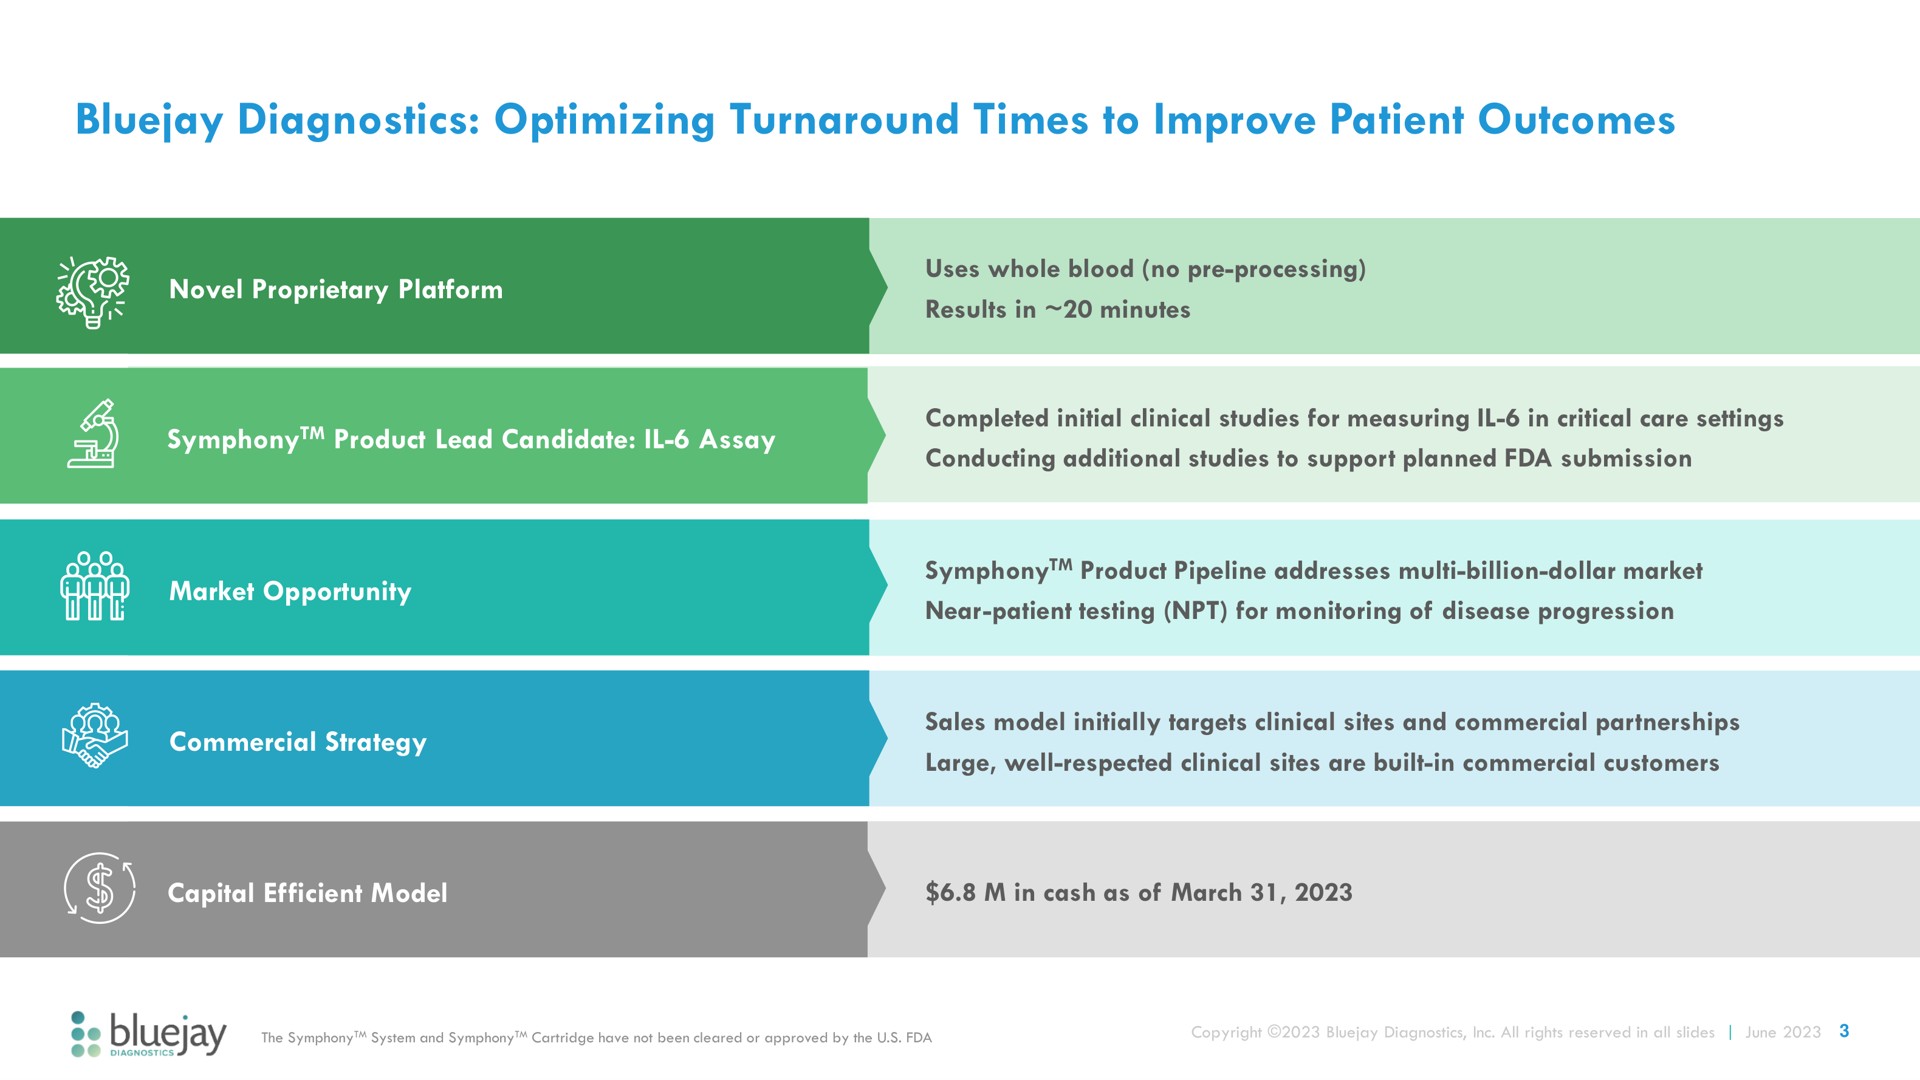 diagnostics optimizing turnaround times to improve patient outcomes | Bluejay